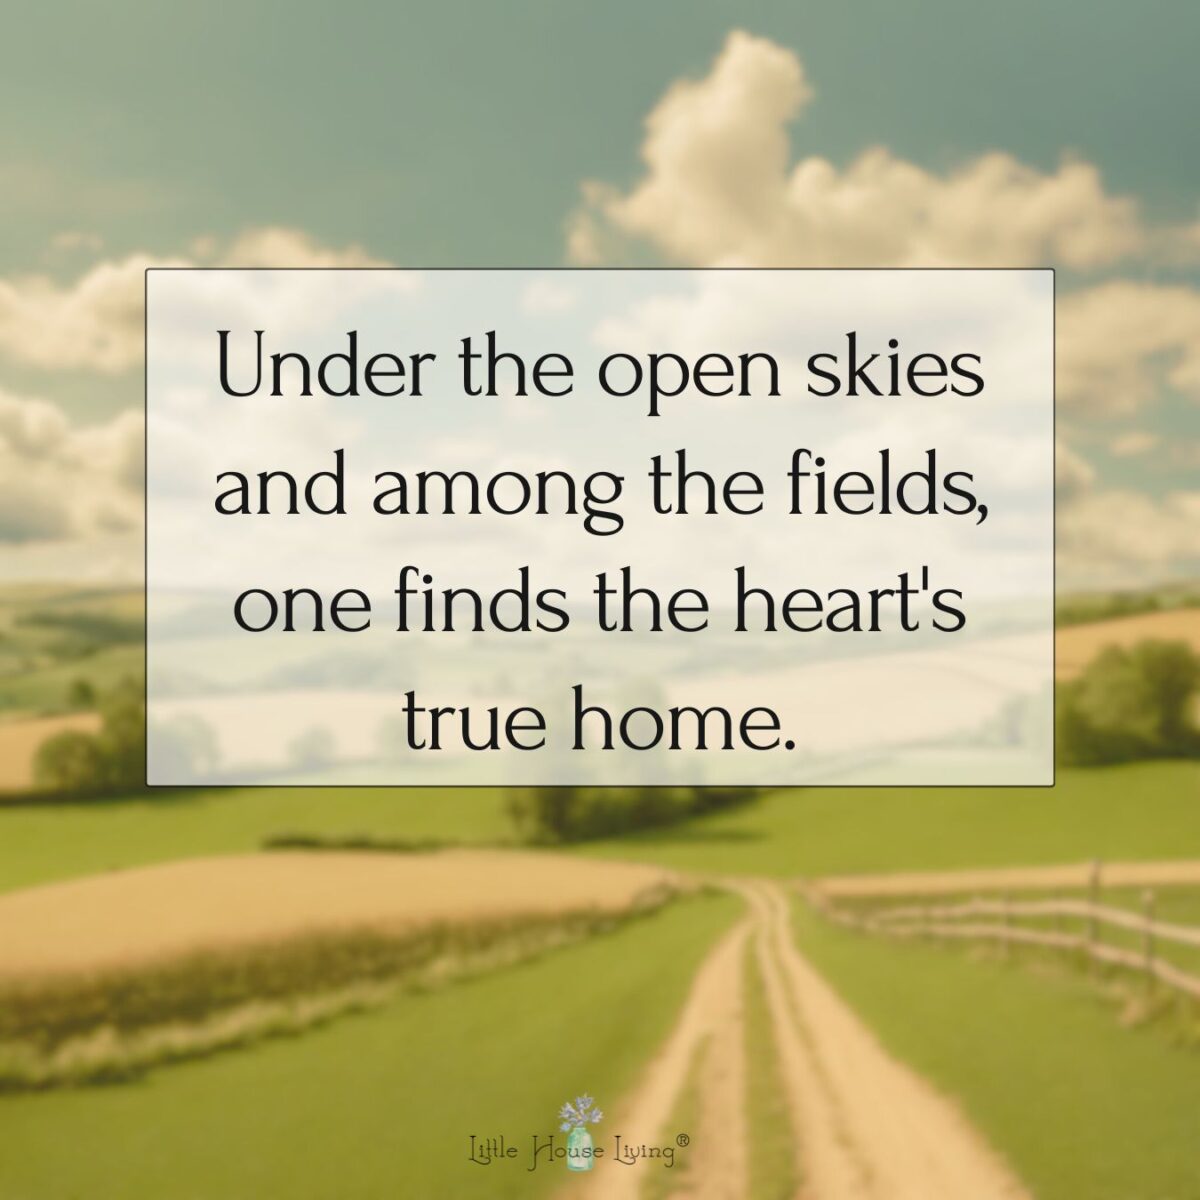 Under the open skies and among the fields, one finds the heart's true home.
